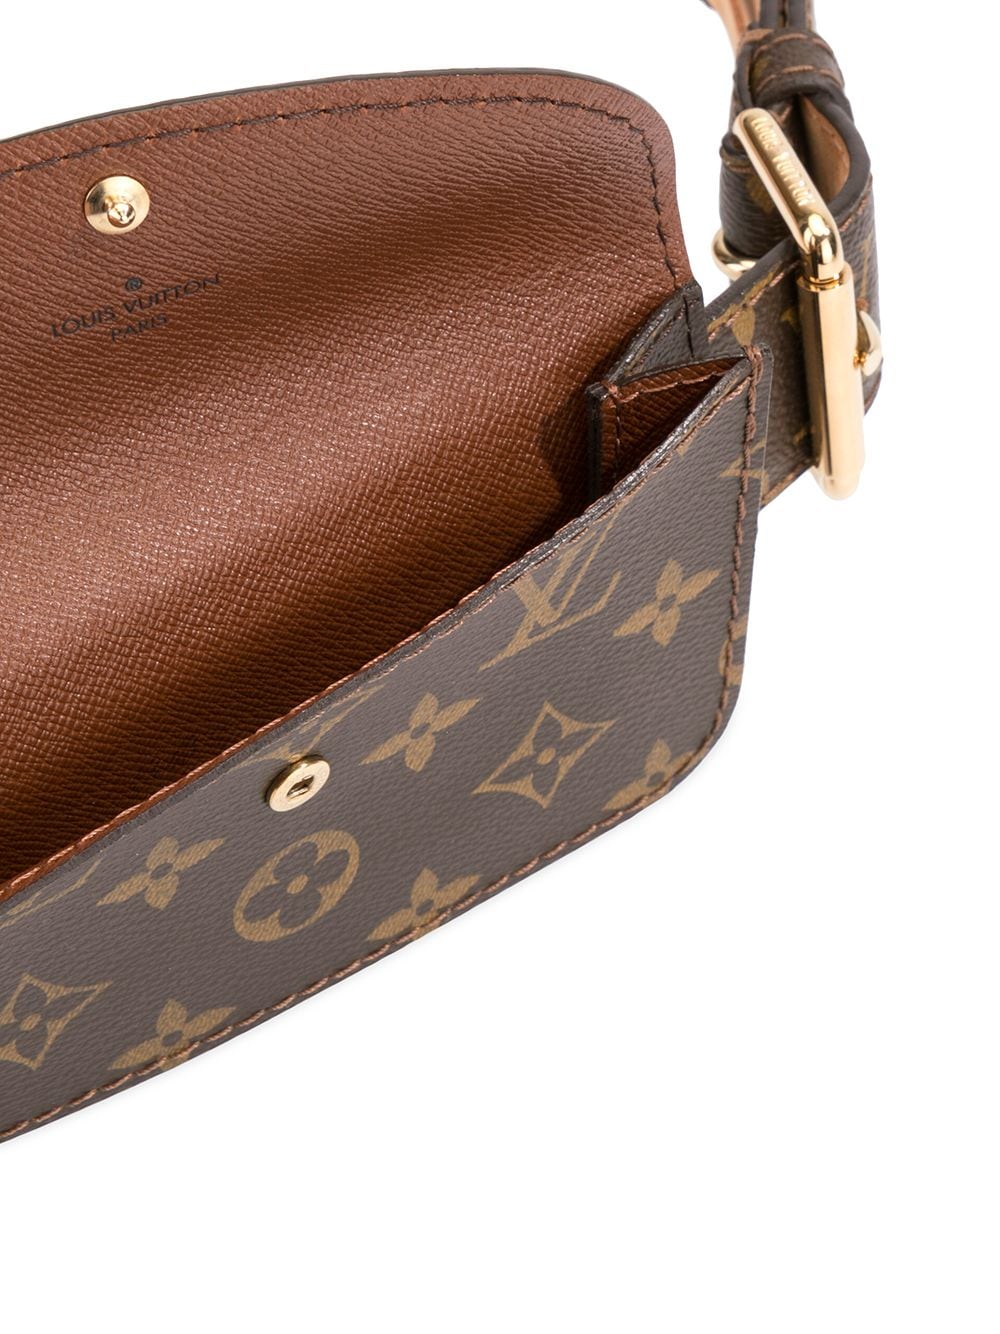 Louis Vuitton Pre-Owned Punch Holes Monogramclutch in Brown